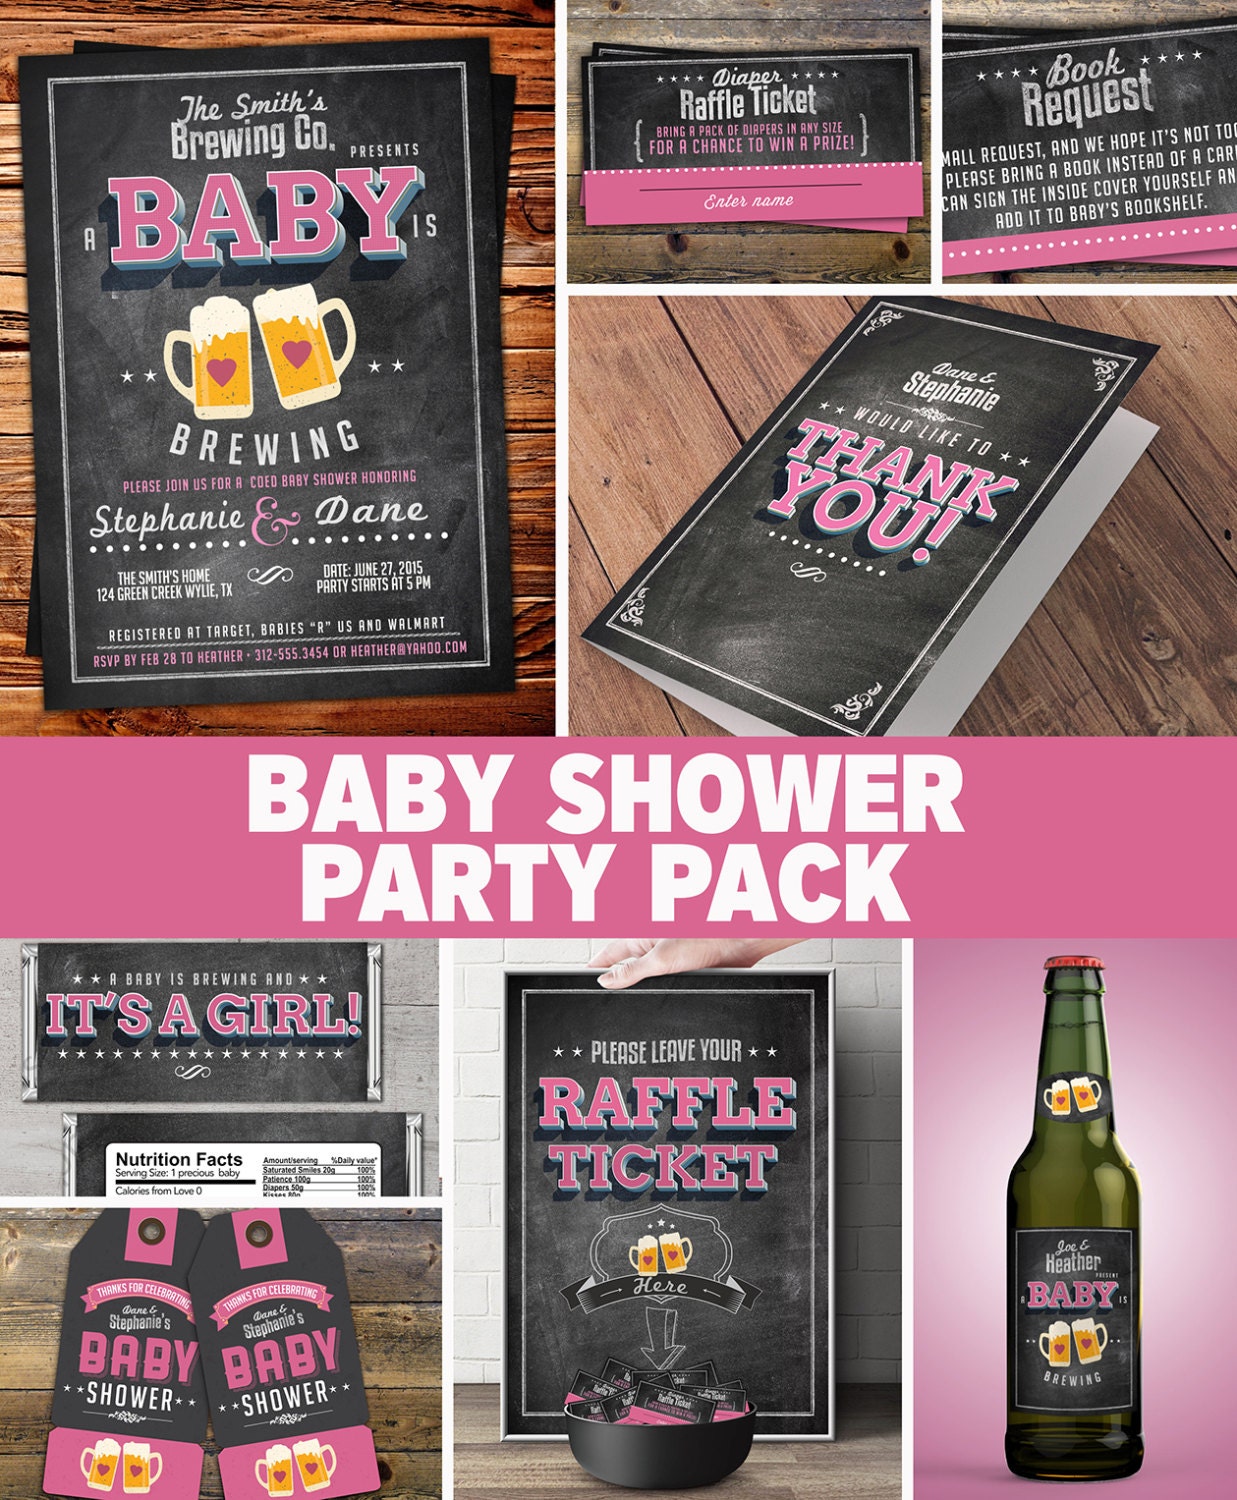 Party Pack, Party Decorations, Coed Baby Shower Invitation- Beer Girl - Boy Shower, Is Brewing